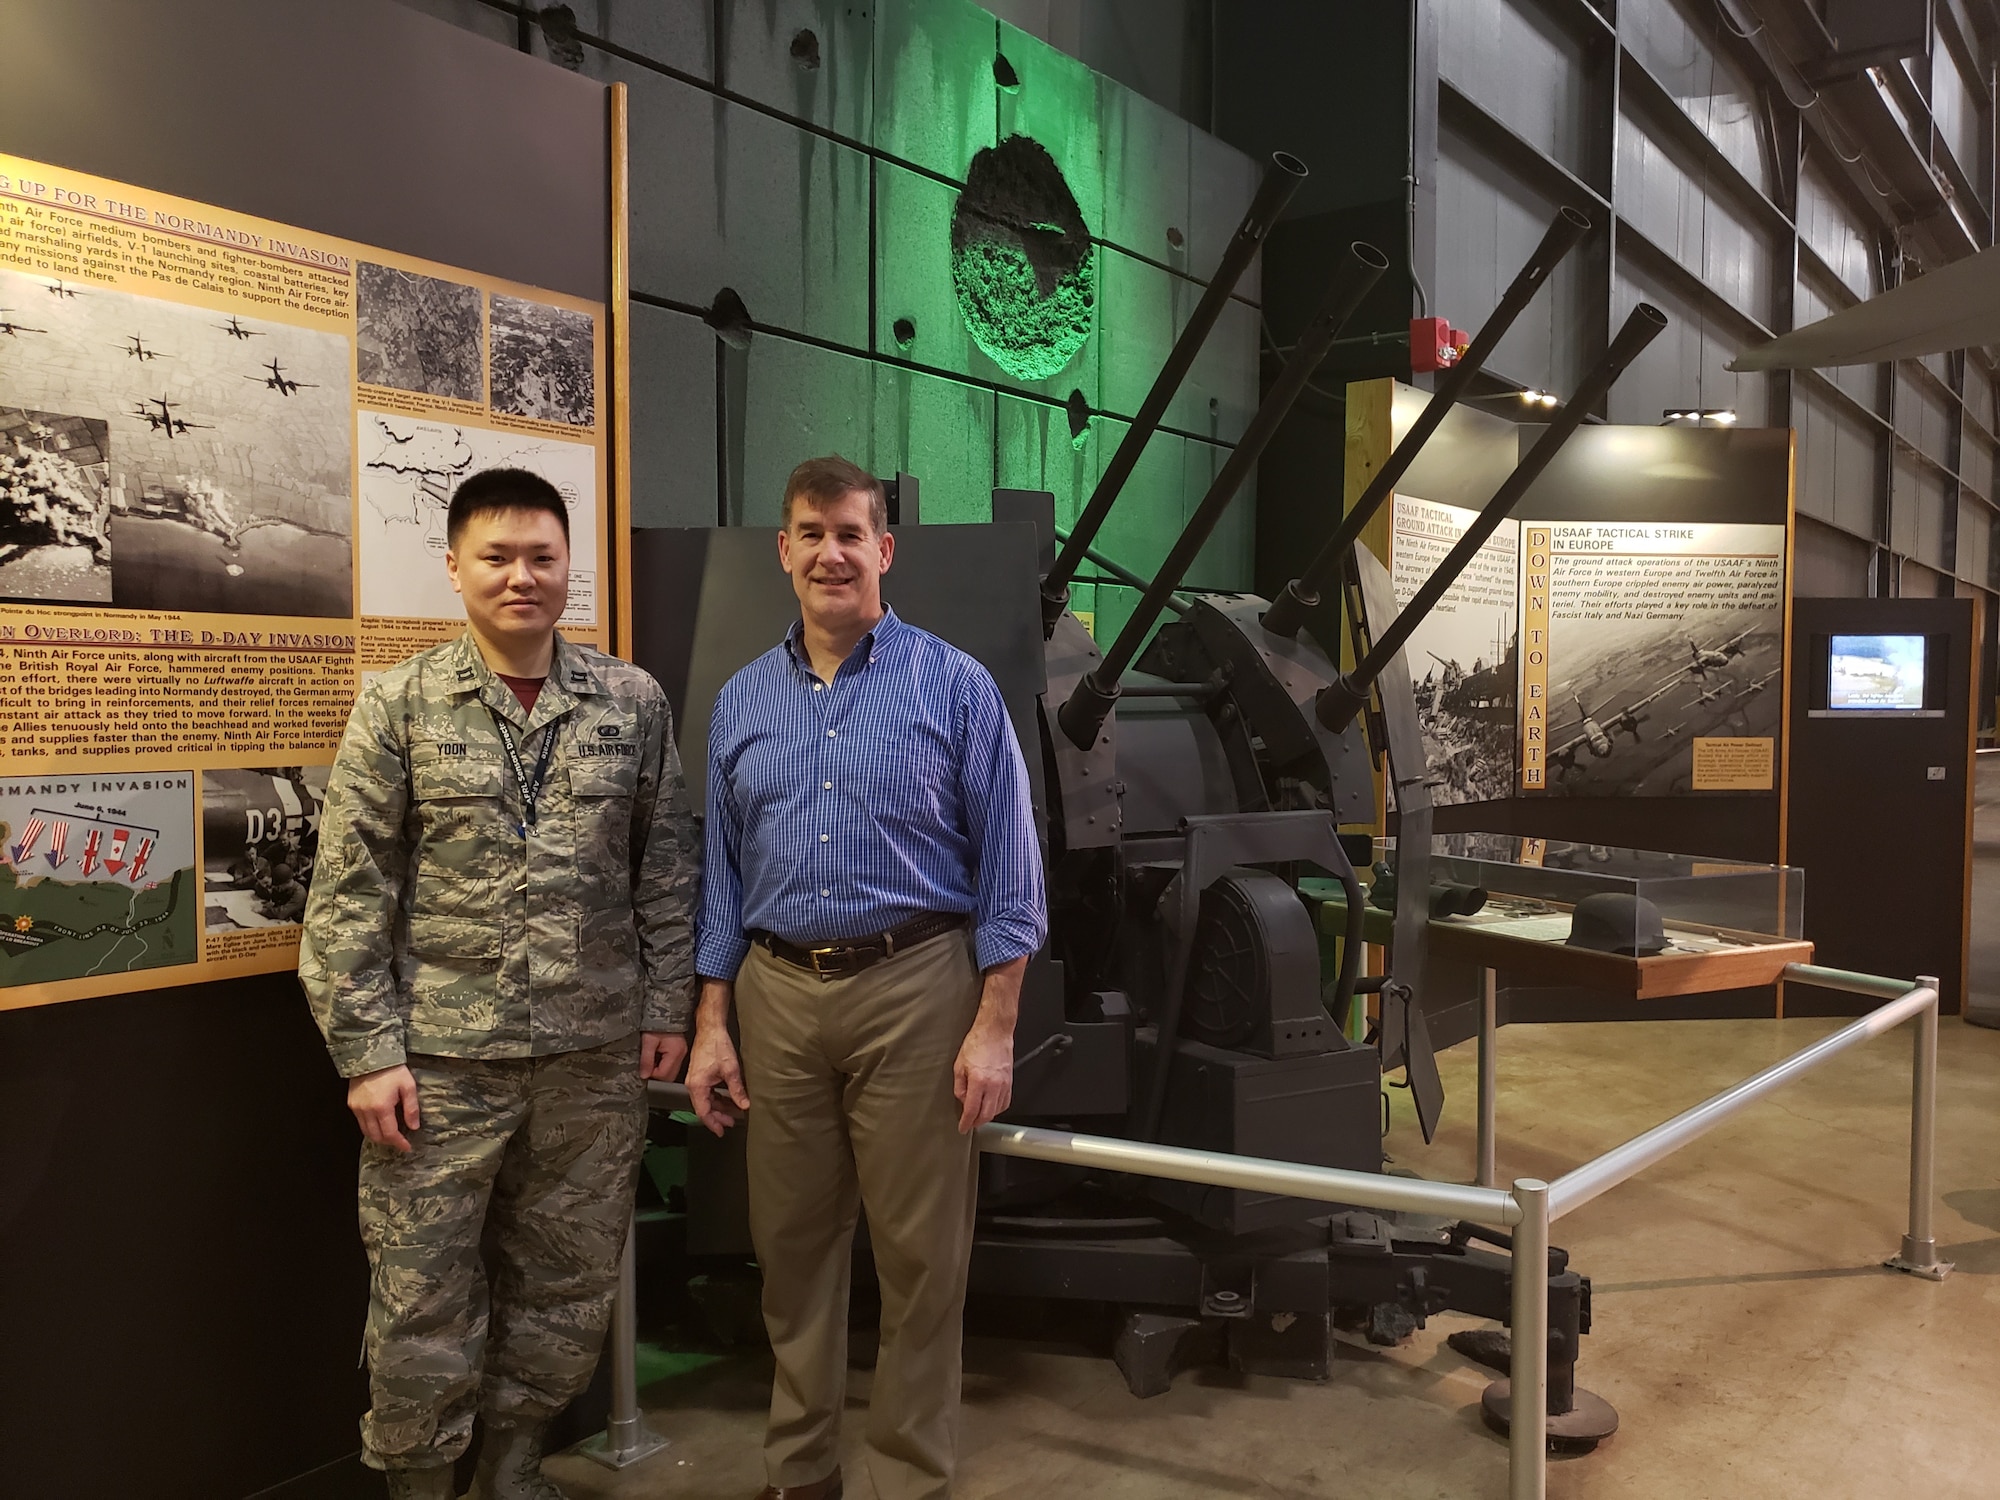 Capt. Yongjun Yoon, an RF sensing engineer from the RF Technology Branch at AFRL's Sensors Directorate, and David Sobota, with the Sensors Effects and Analysis Branch, in front of a ZPU-4 Soviet-built anti-aircraft gun at the National Museum of the United States Air Force.